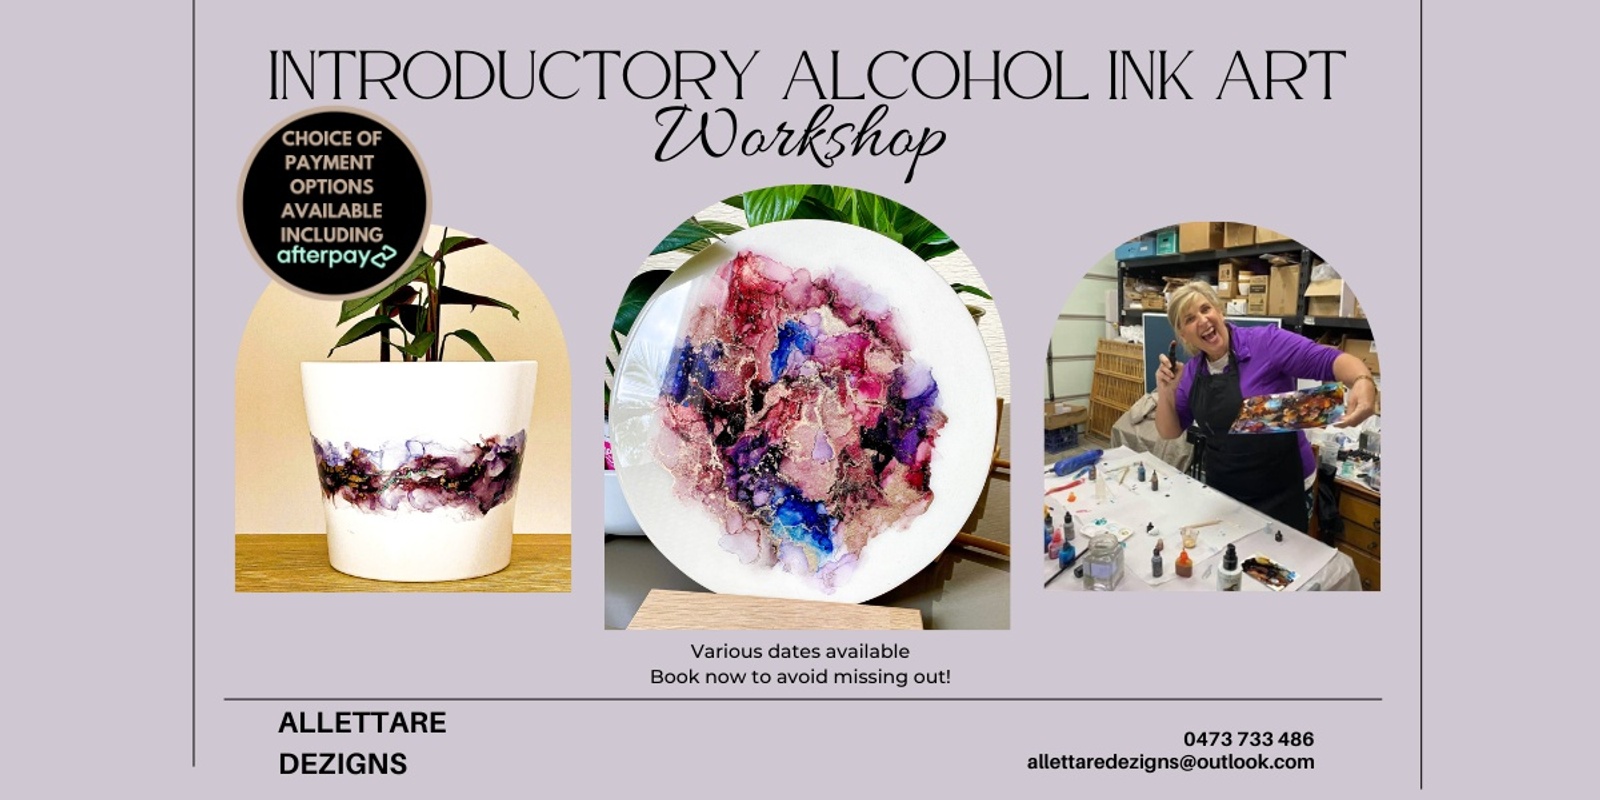 Banner image for Alcohol Ink Art Workshop in Cardiff!